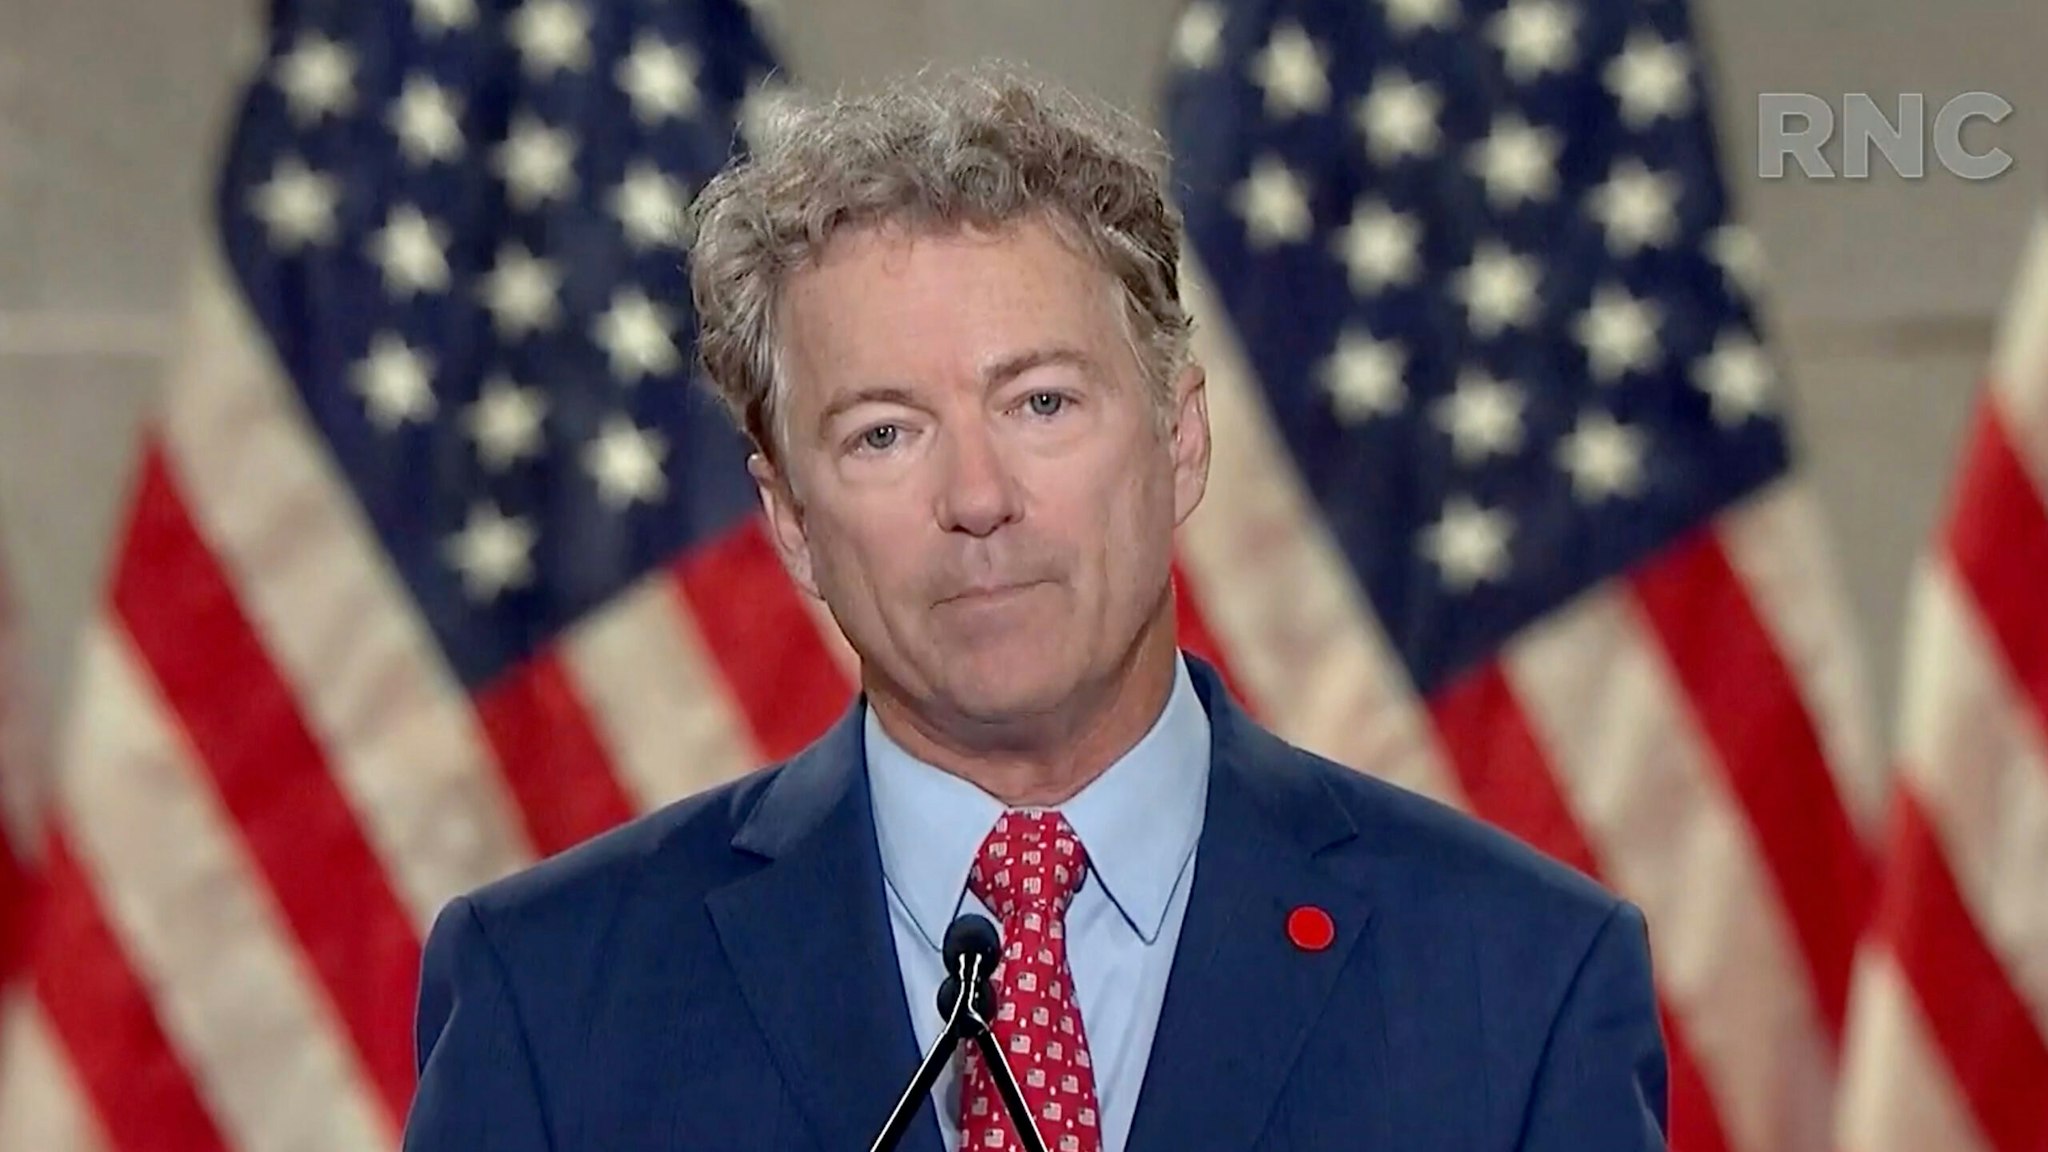 CHARLOTTE, NC - AUGUST 25: (EDITORIAL USE ONLY) In this screenshot from the RNC’s livestream of the 2020 Republican National Convention, U.S. Sen. Rand Paul (R-KY) addresses the virtual convention on August 25, 2020. The convention is being held virtually due to the coronavirus pandemic but will include speeches from various locations including Charlotte, North Carolina and Washington, DC.